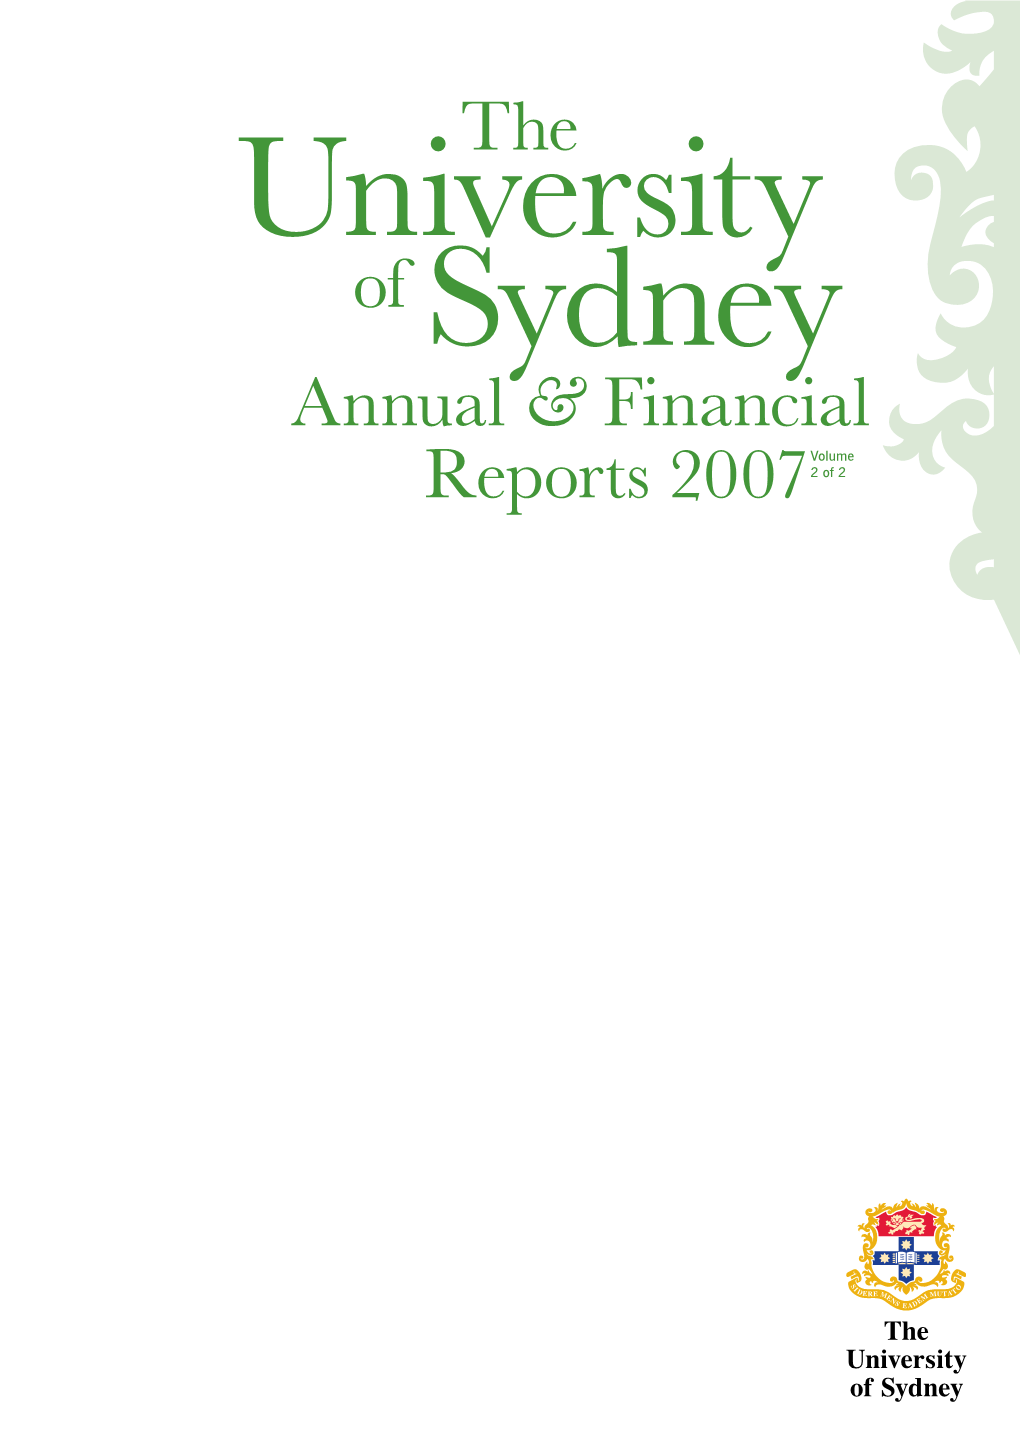 The Annual & Financial Reports 2007 Of